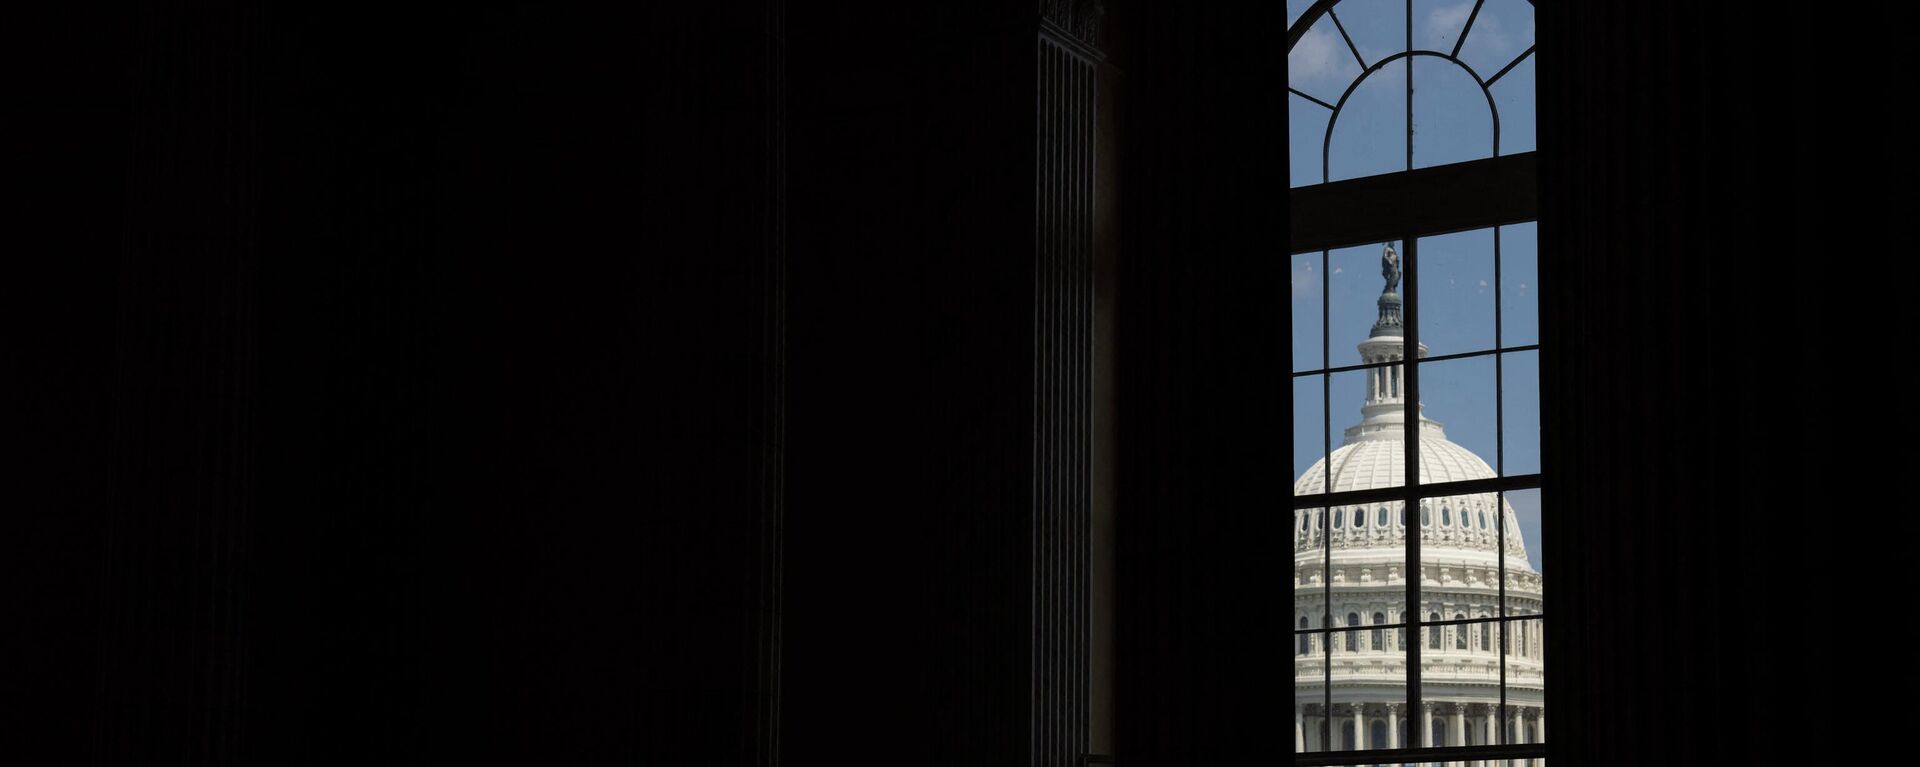 WASHINGTON, DC - JUNE 13: A view of the U.S. Capitol building from outside the hearing room during a hearing on the January 6th investigation in the Cannon House Office Building on June 13, 2022 in Washington, DC. - Sputnik International, 1920, 28.07.2022